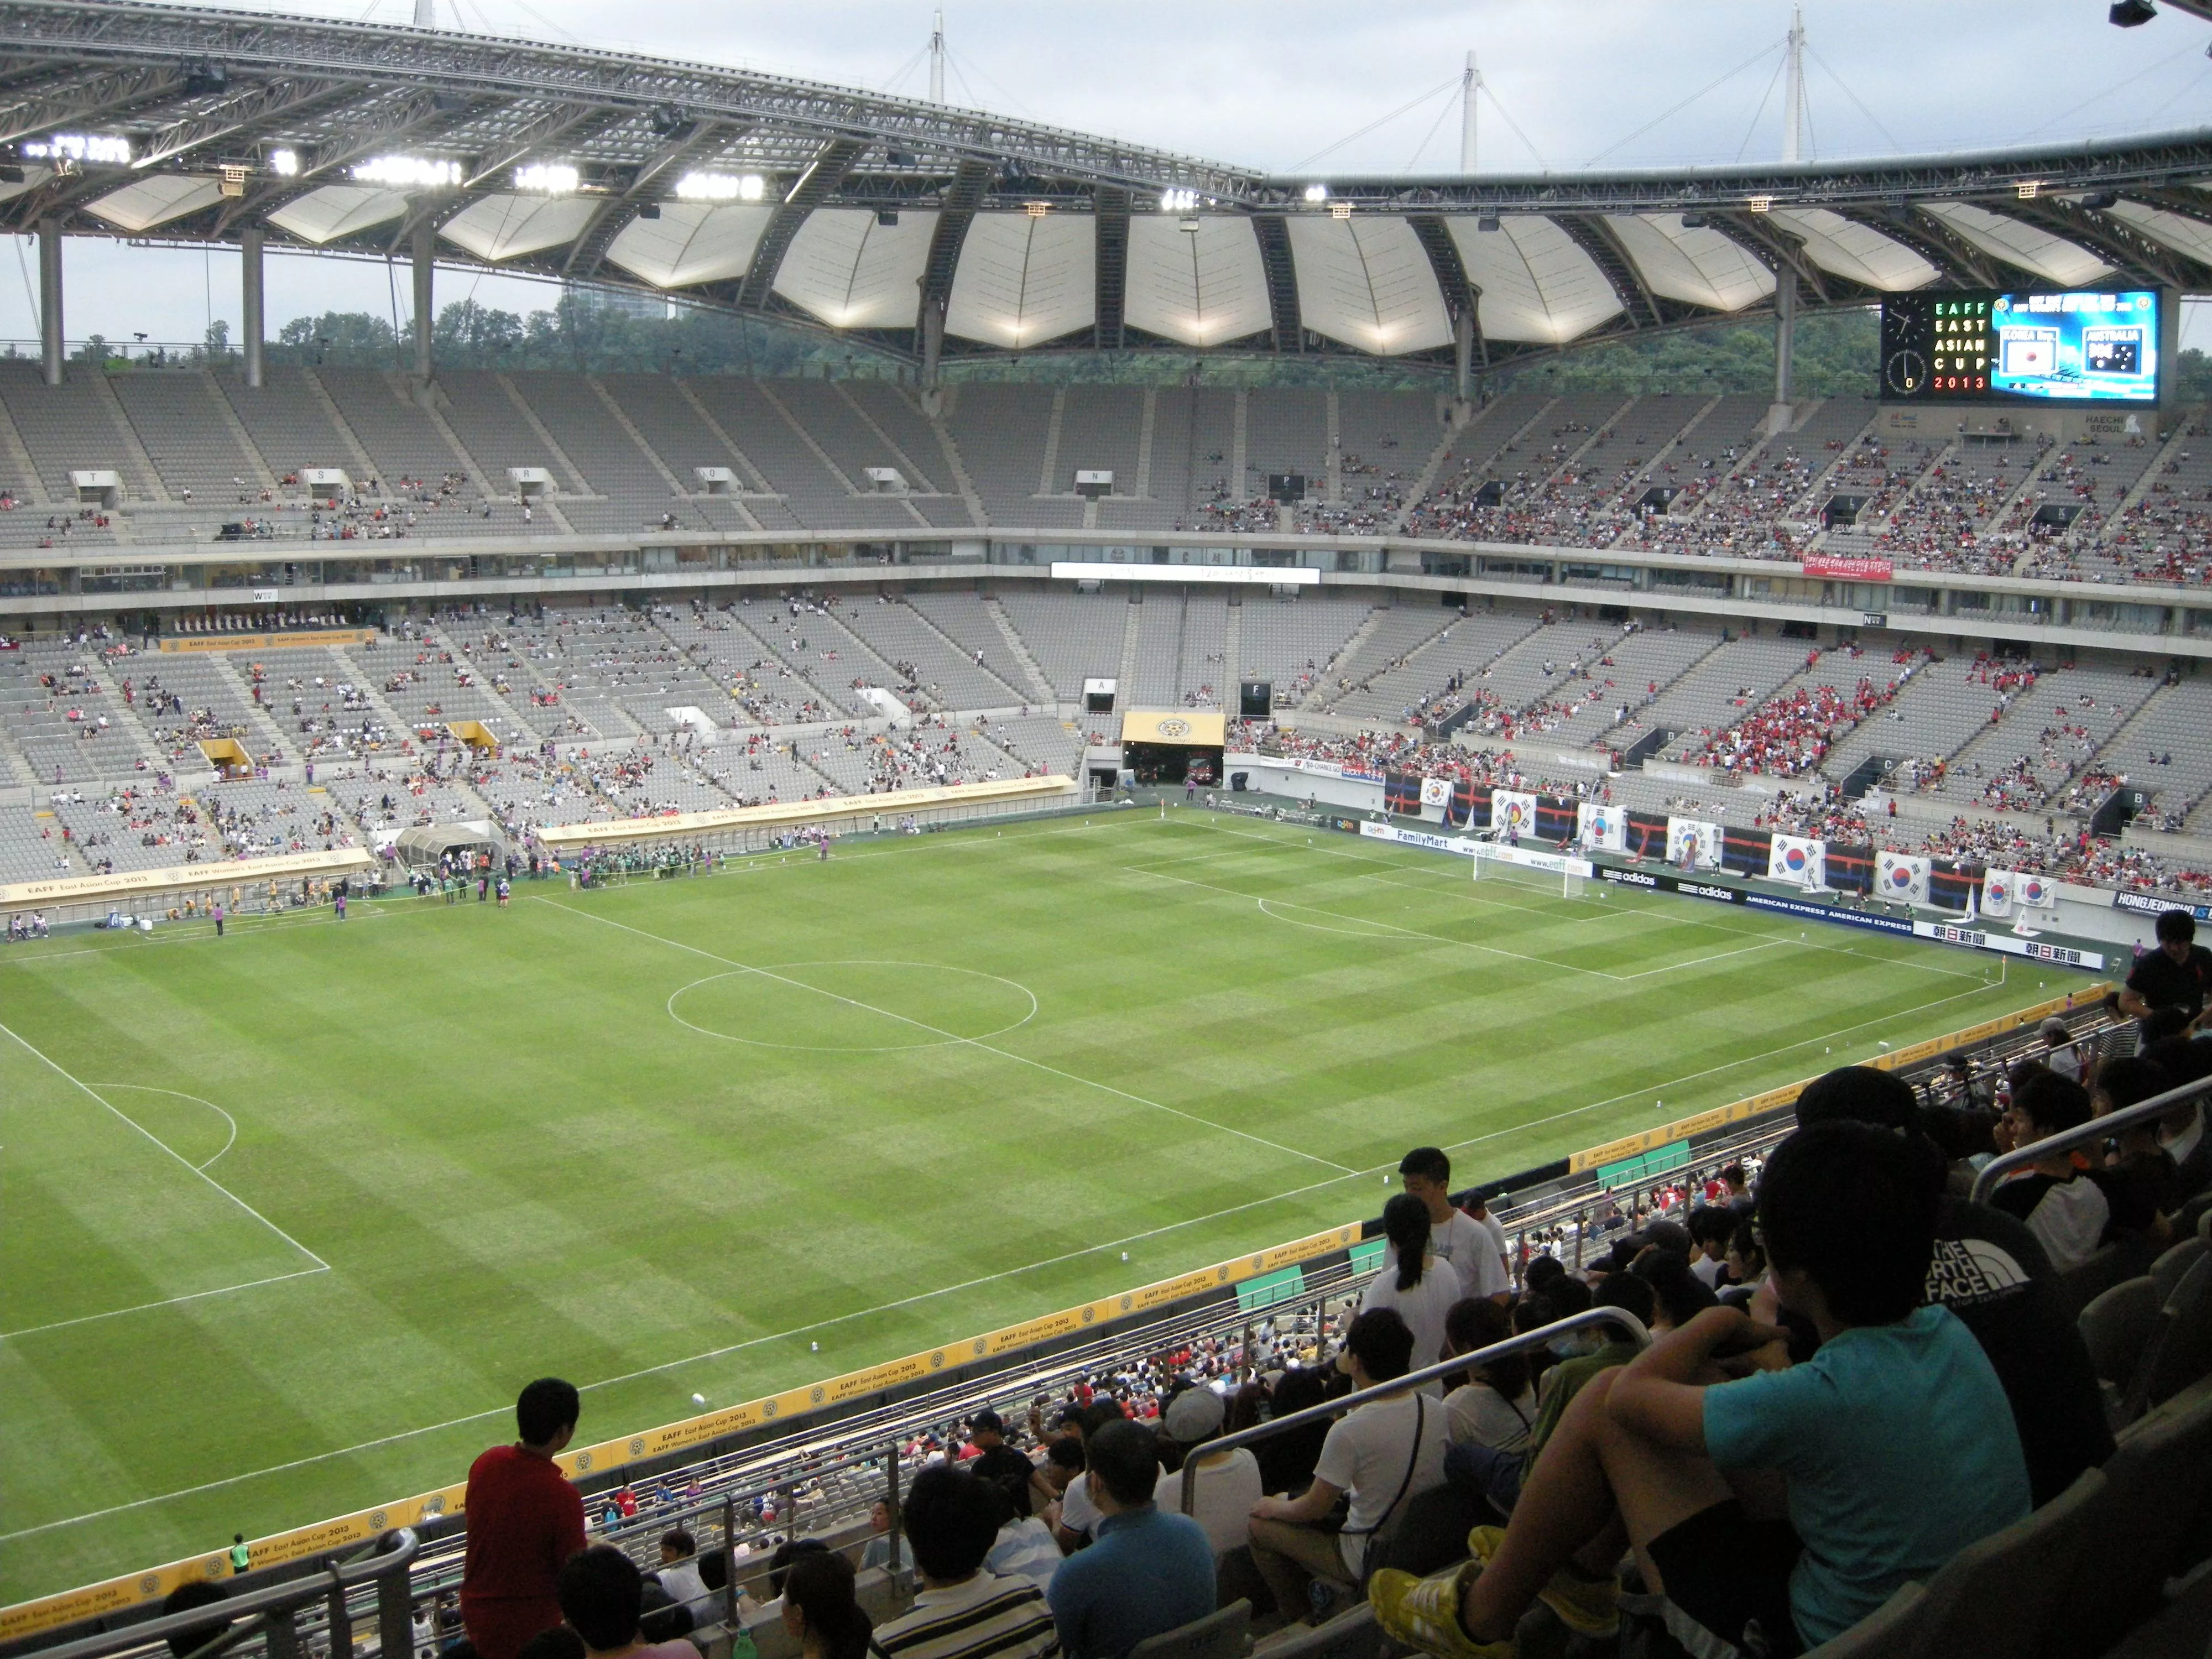 Seoul World Cup Stadium in South Korea, East Asia | Football - Rated 3.7